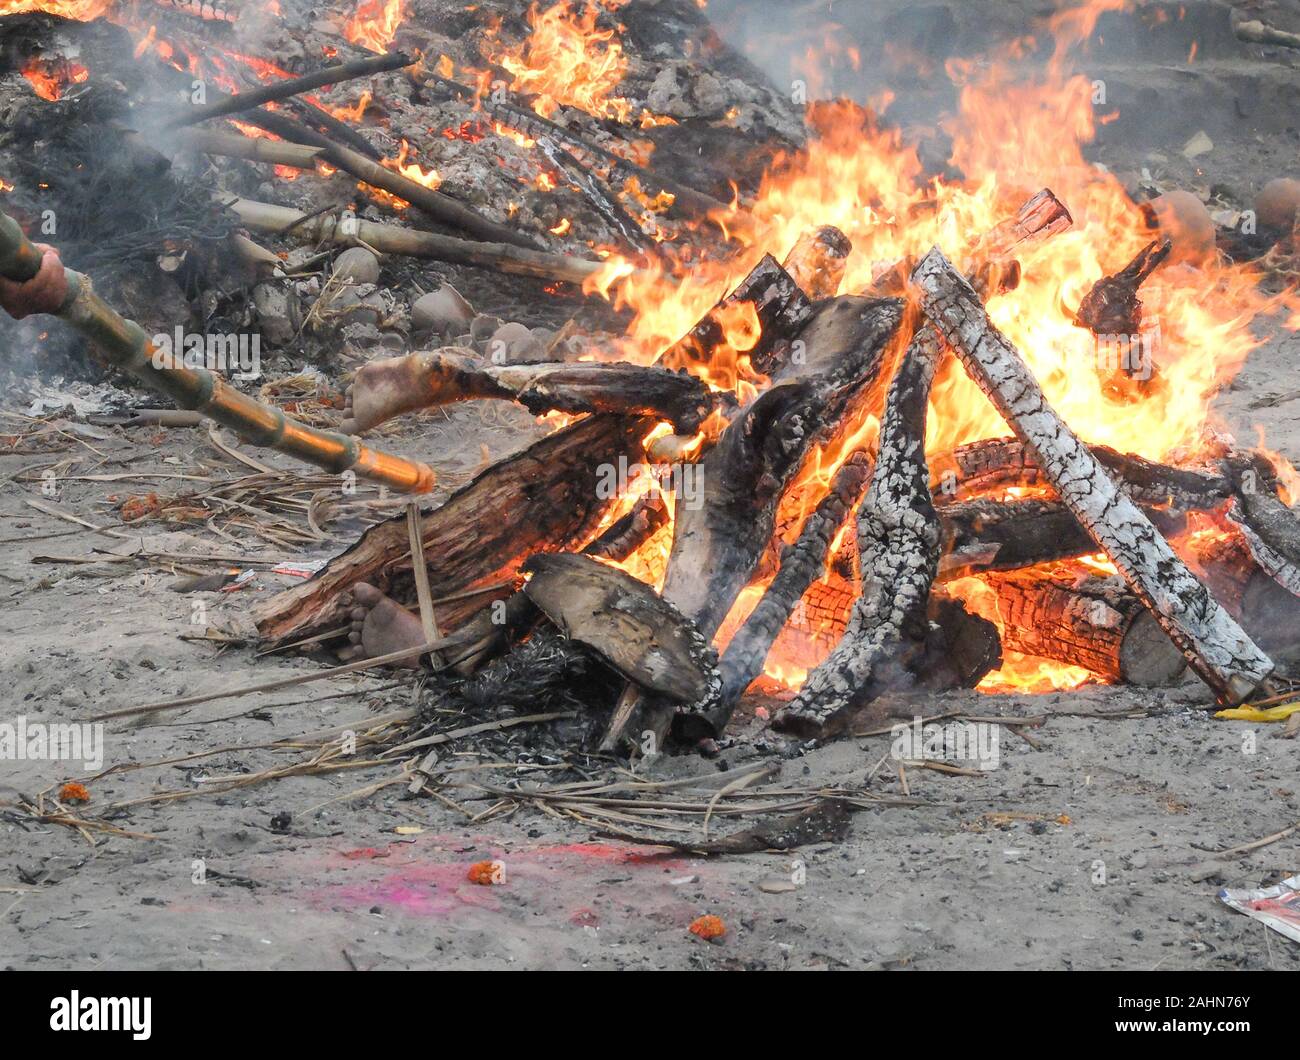 The intense heat,smoke and odors are overwhelming as a worker nearby tends a pyre with a bamboo pole and body parts are visible while Hindu corpses ar Stock Photo